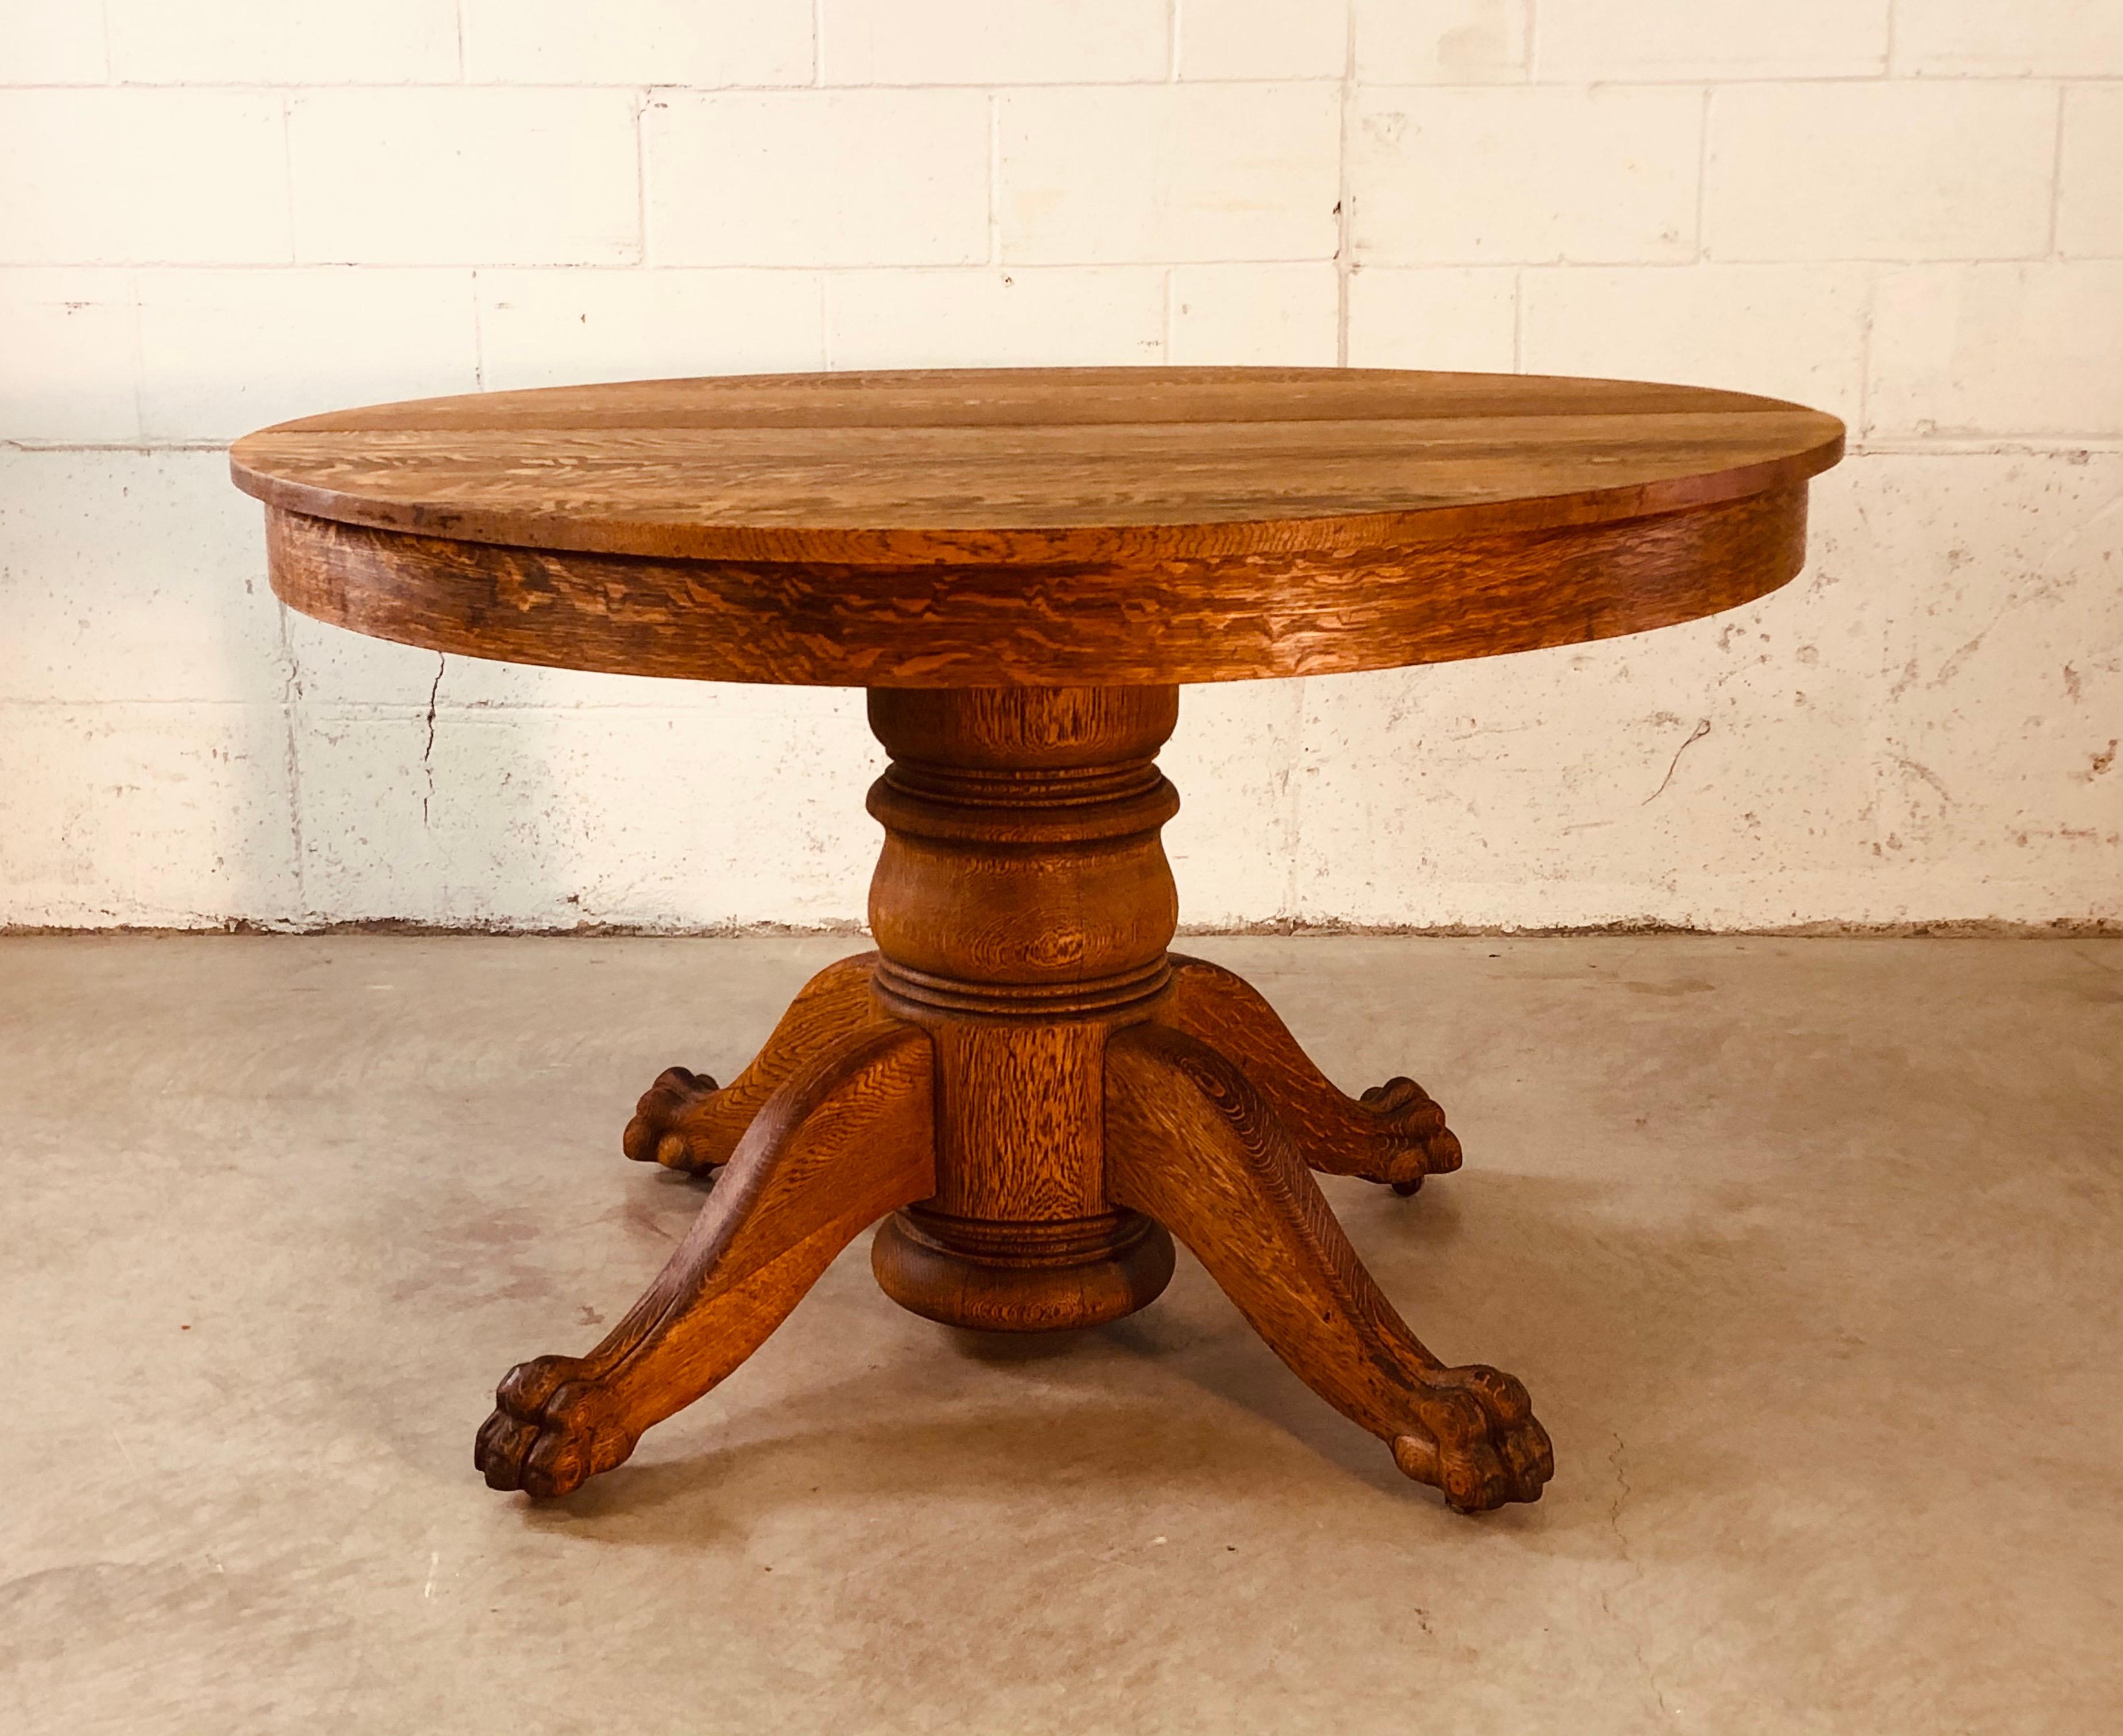 Antique quartersawn oak claw foot pedestal round table. Beautiful claw feet that are large and well defined. The table has a great oak grain that comes through with the recent restoration. No additonal boards. No marks.